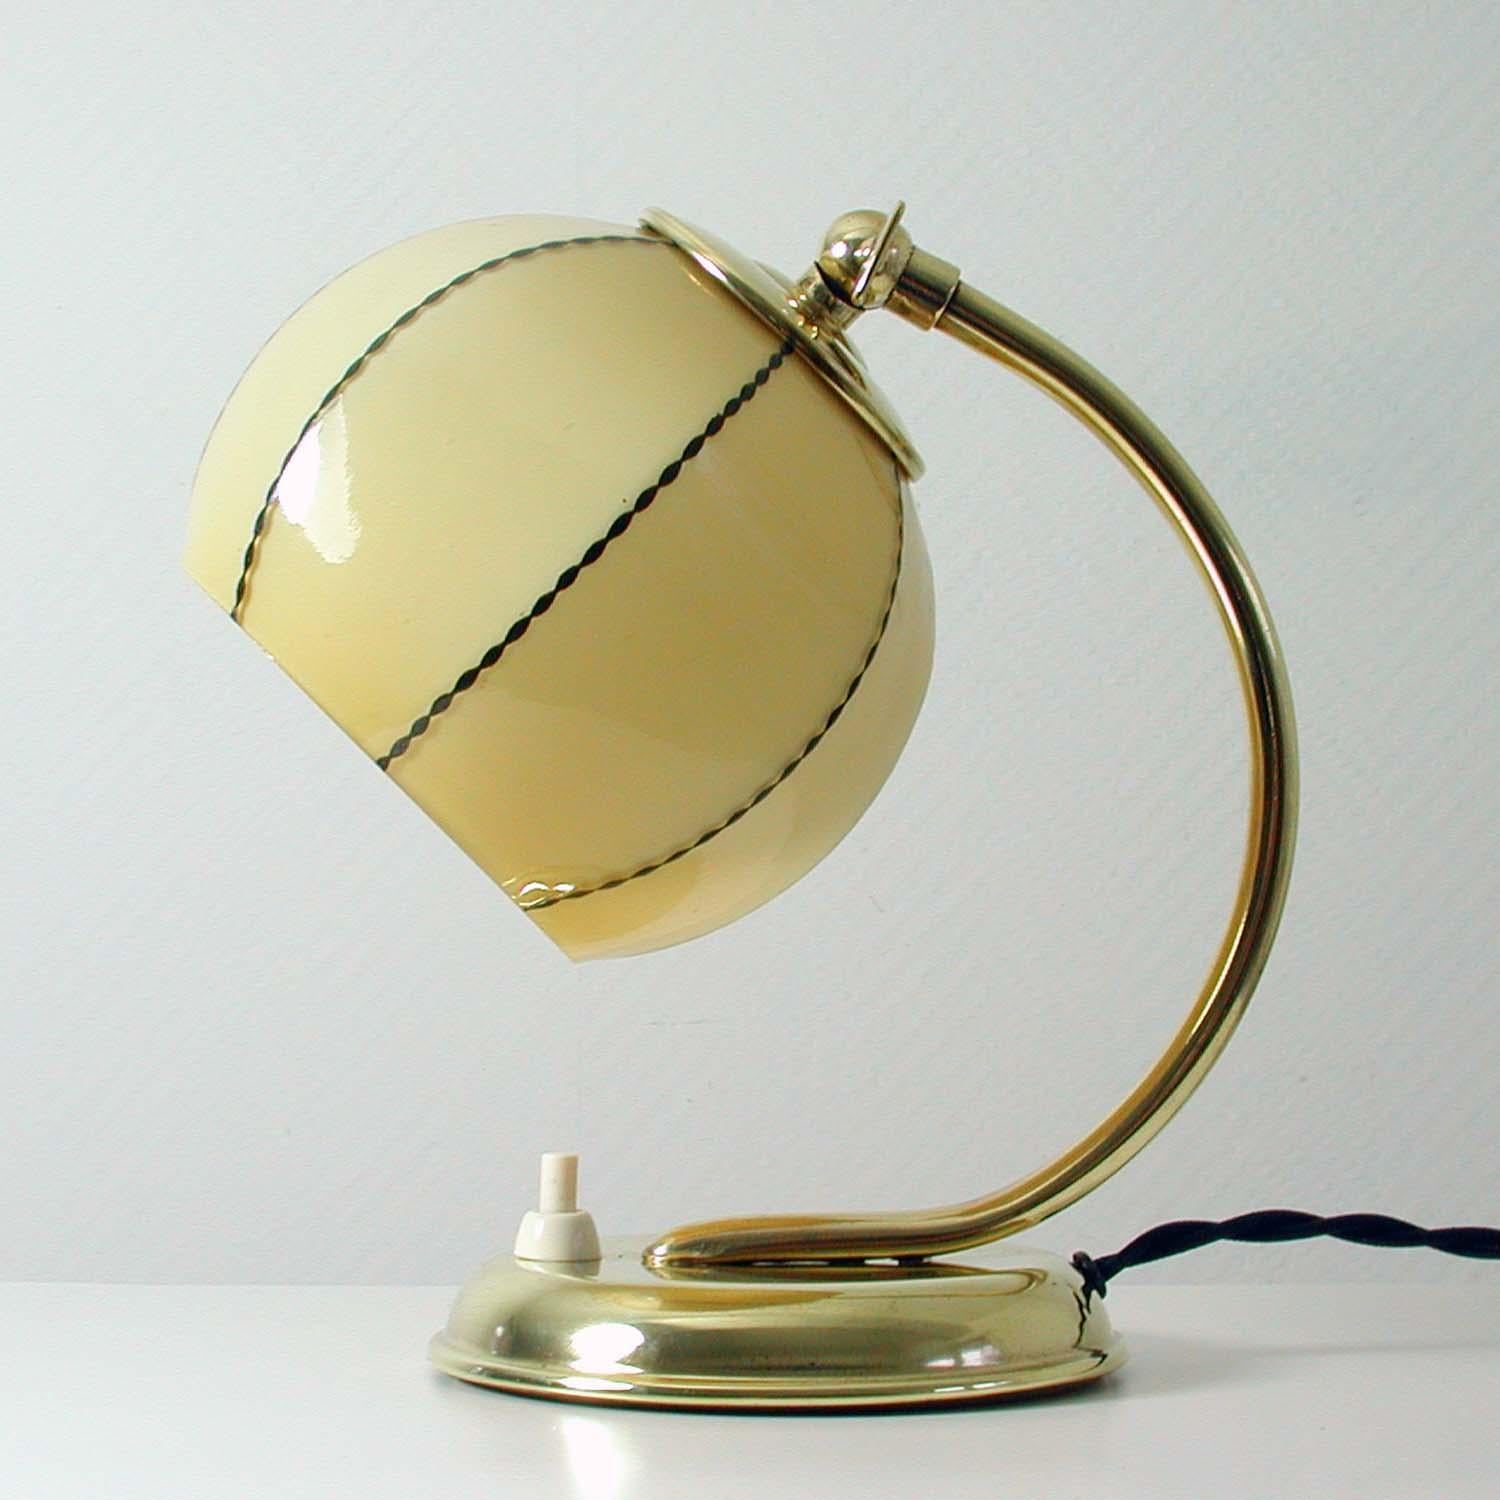 Mid-20th Century Vintage 1930s German Bauhaus Art Deco Brass and Opal Table Lamp Sconce